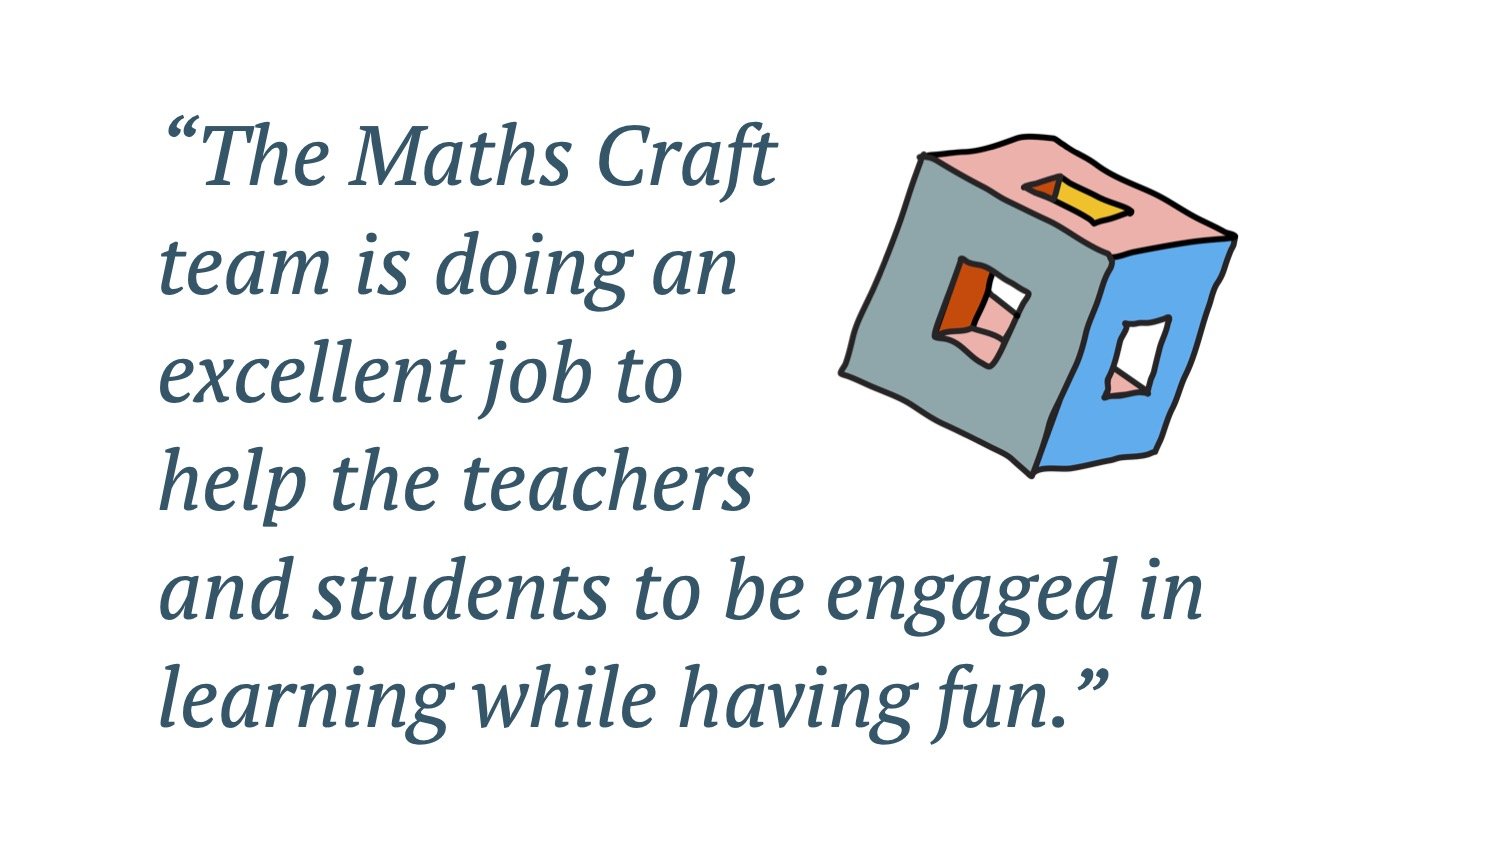 Quote: The Maths Craft team is doing an excellent job to help the teachers and students to be engaged in learning while having fun.